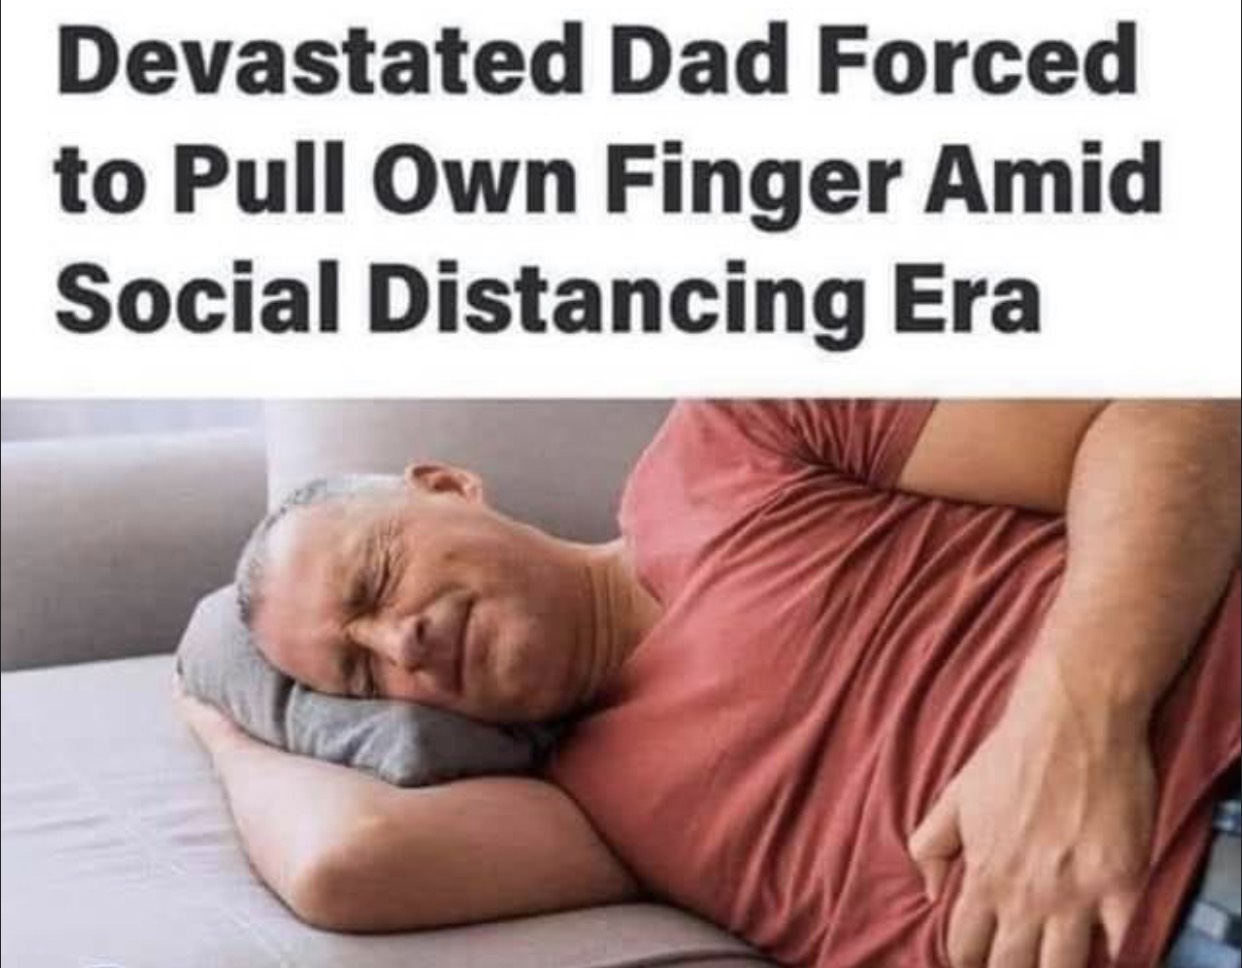 photo caption - Devastated Dad Forced to Pull Own Finger Amid Social Distancing Era